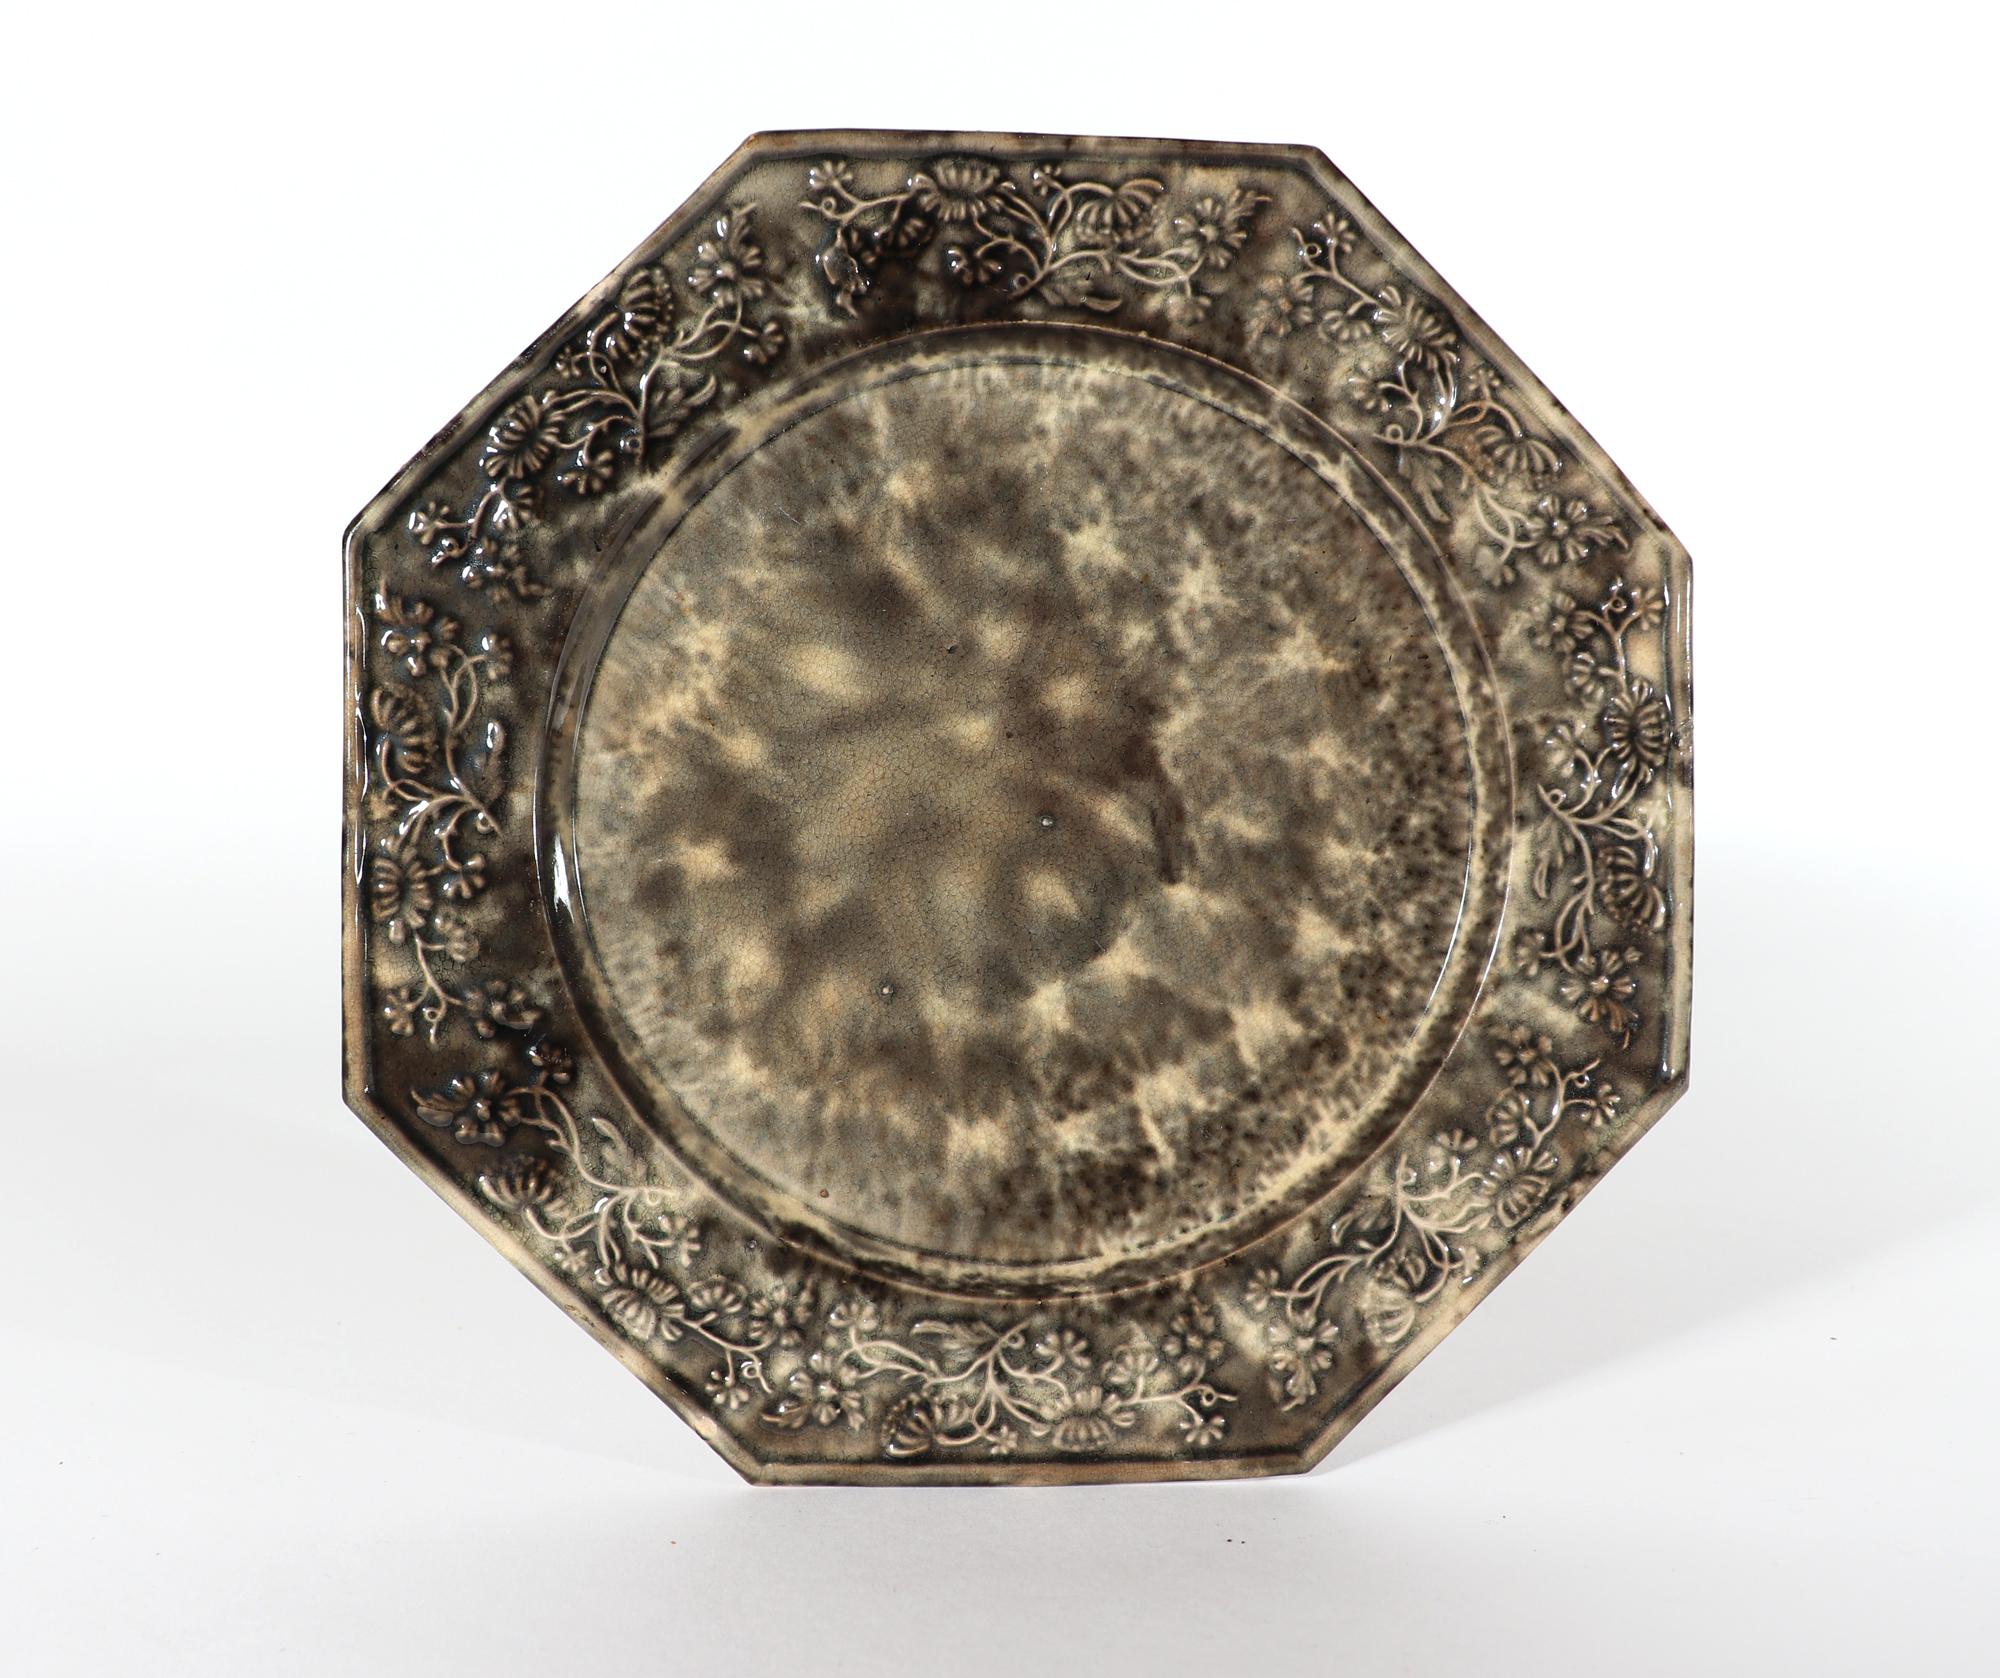 English Creamware Whieldon-type Gray Tortoiseshell Plate,
Circa 1765-75

The octagonal shaped plate is covered to the front and back with a very pleasing gray tortoise-shell pattern.  The rim is raised and the border has an unusual design of